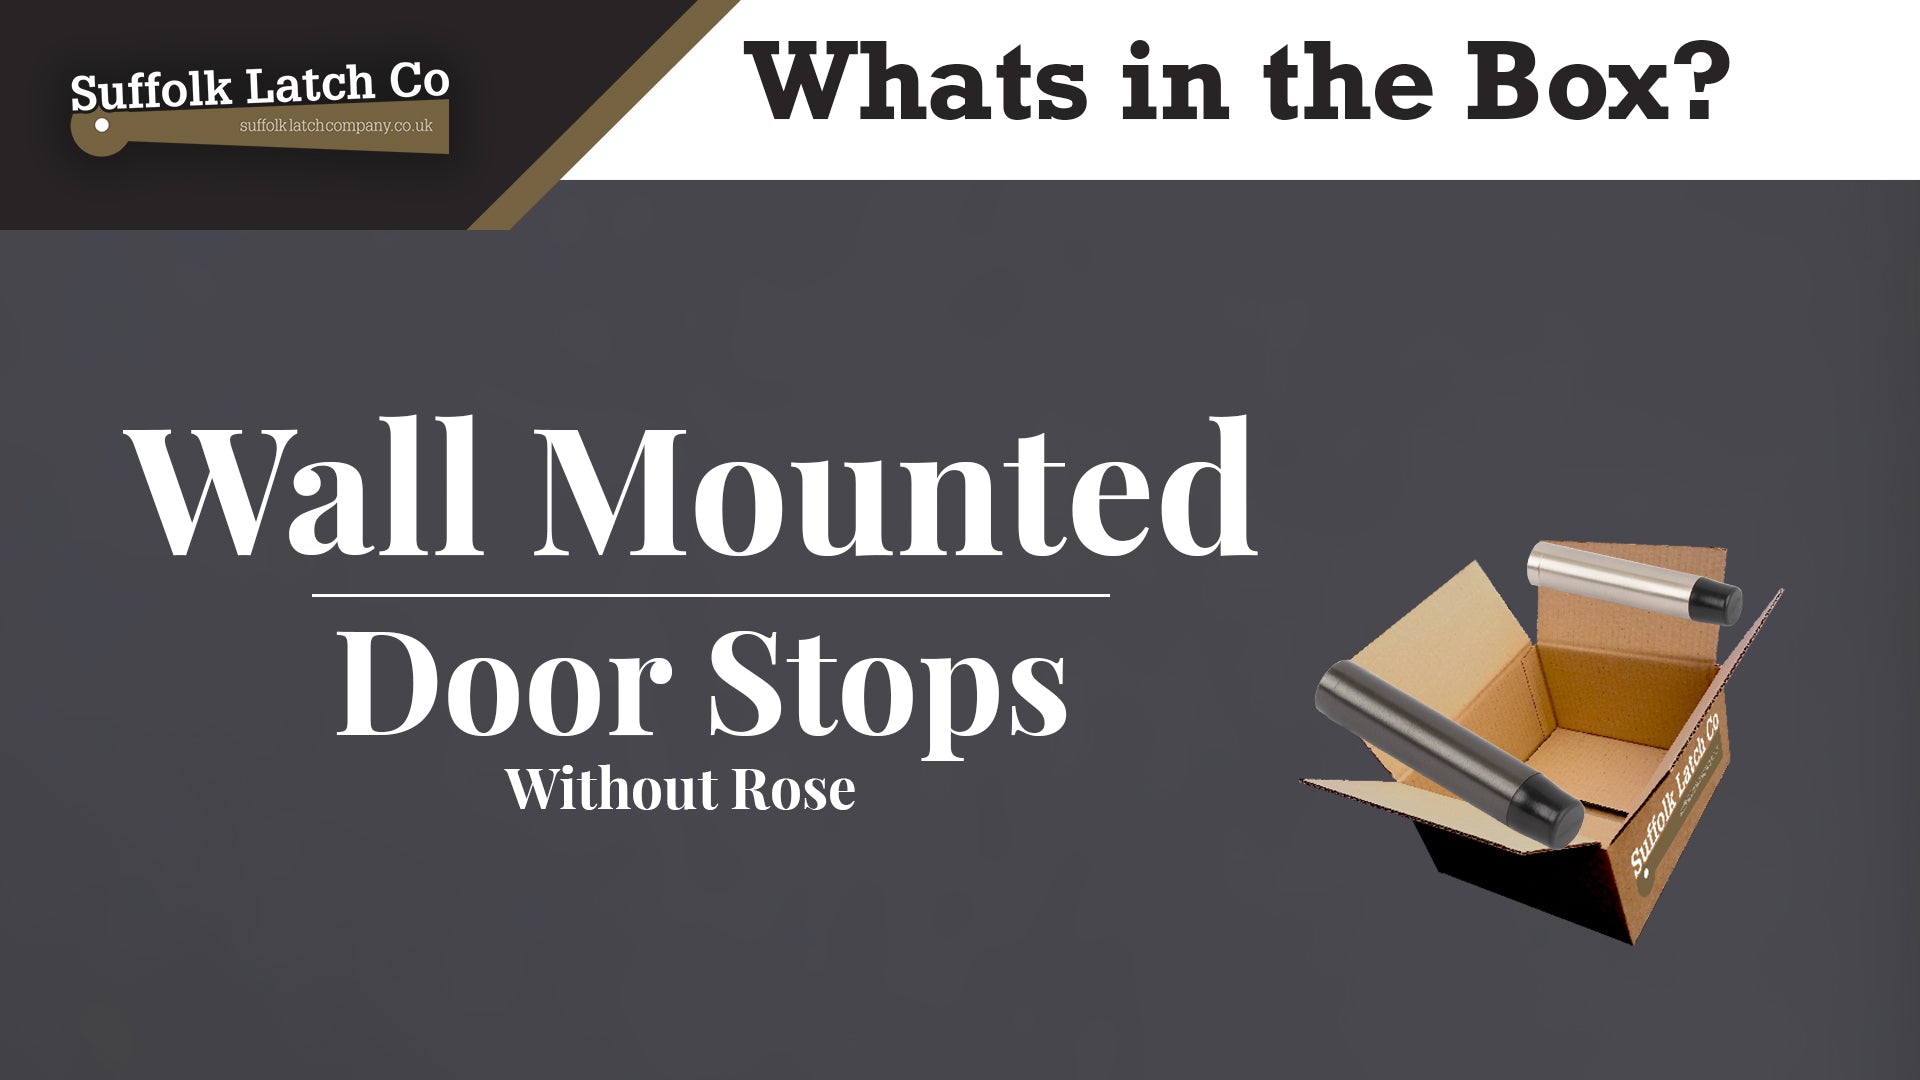 What's in the Box: Wall Mounted Door Stops Without Rose